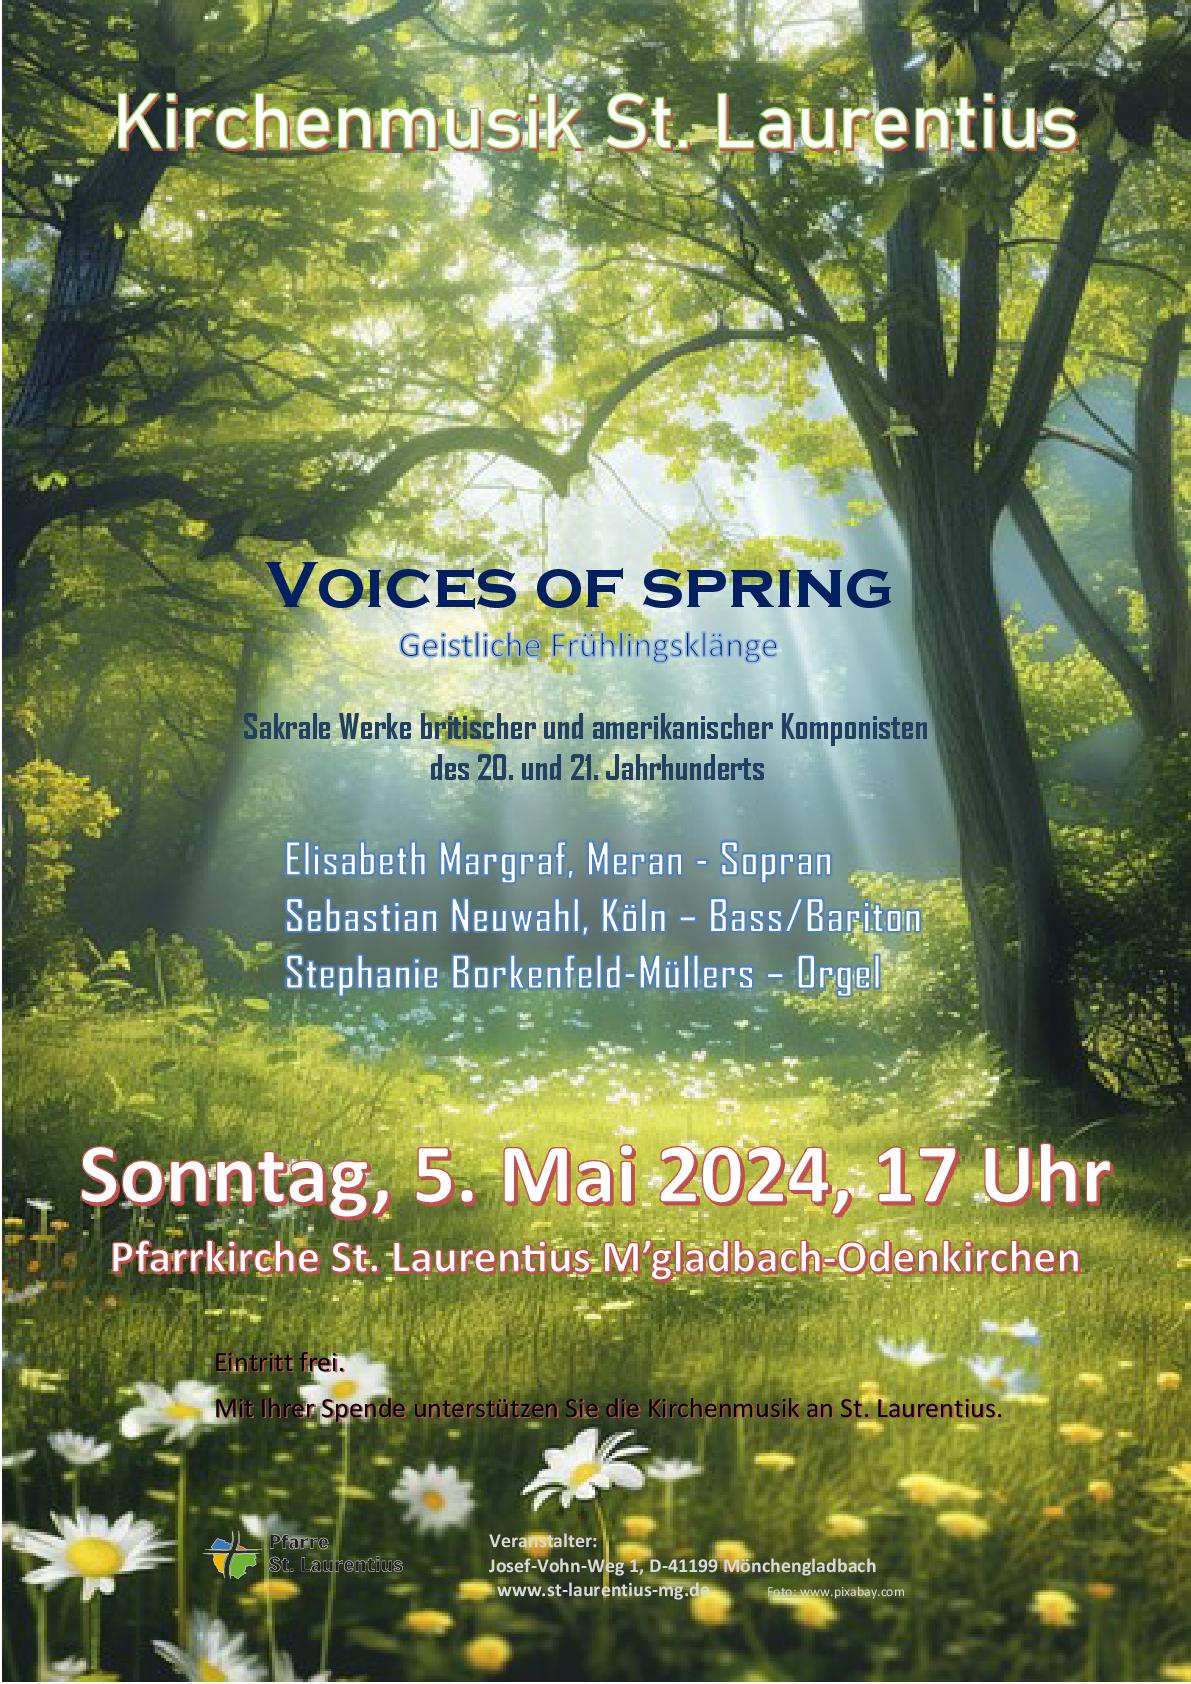 Voices of spring - Plakat-001 (c) pixabay